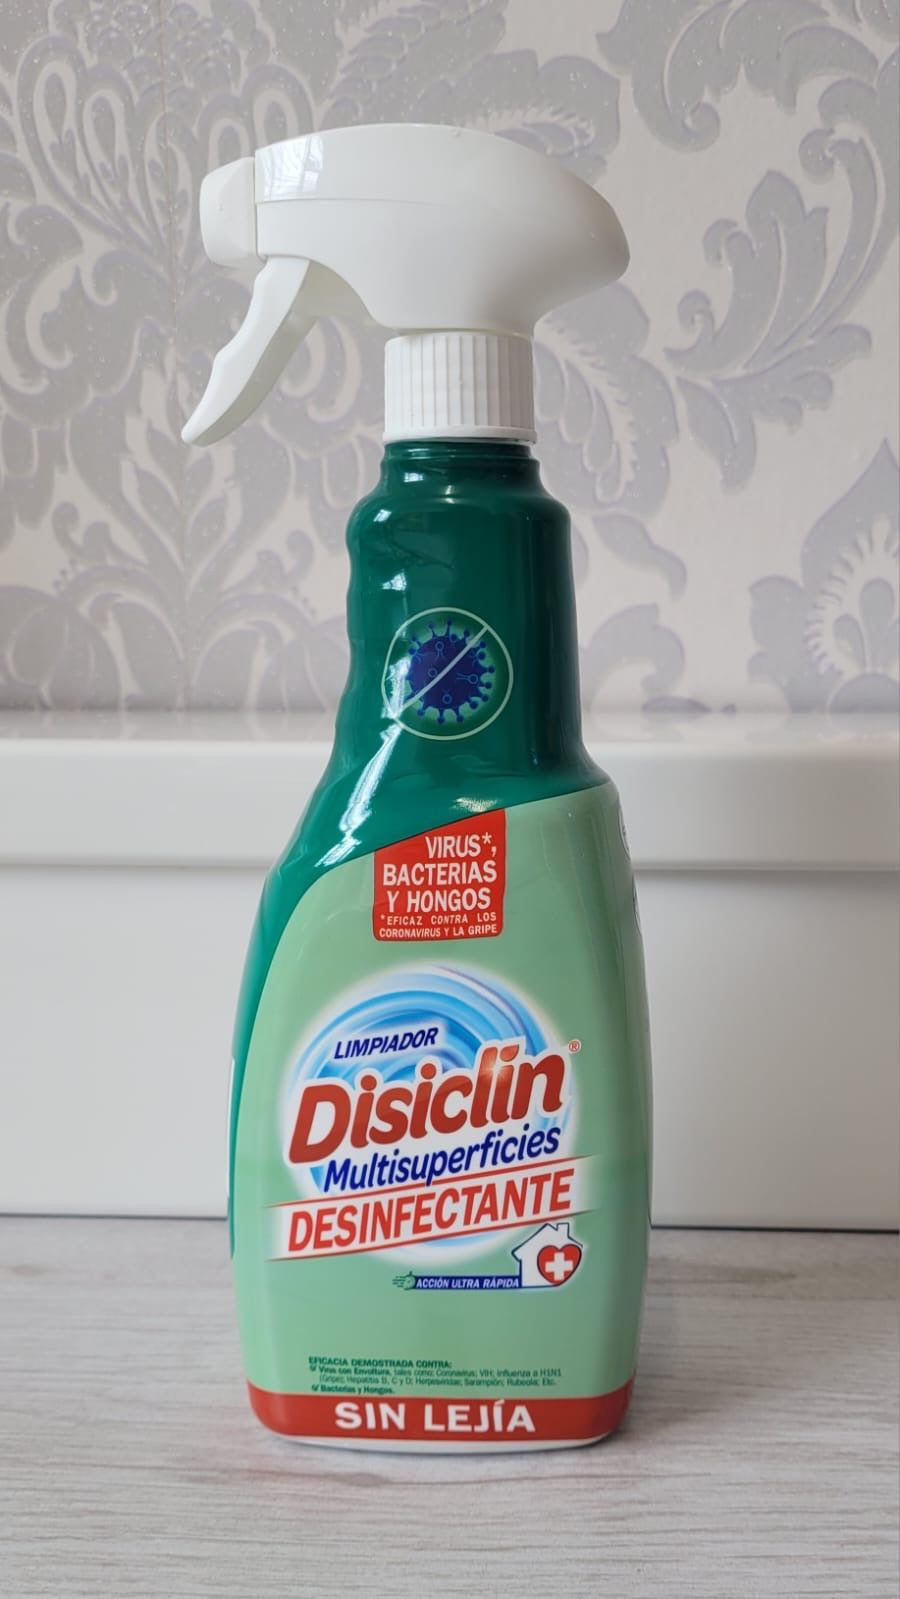 Disiclin multisurface antibacterial disinfectant spray - 750ml